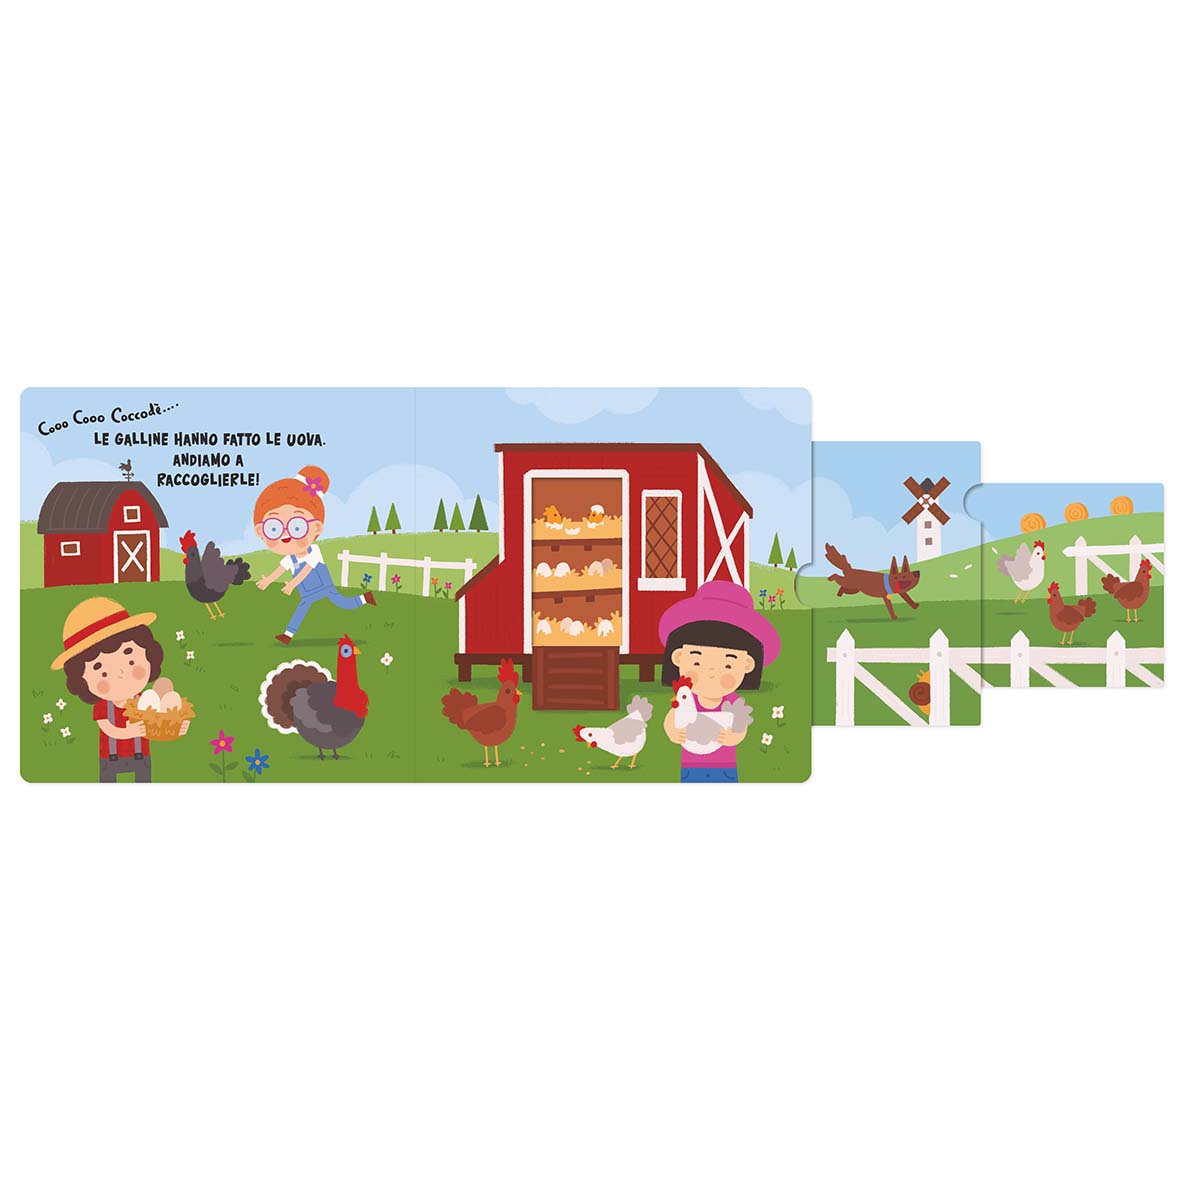 Scroll and discover - A day on the farm